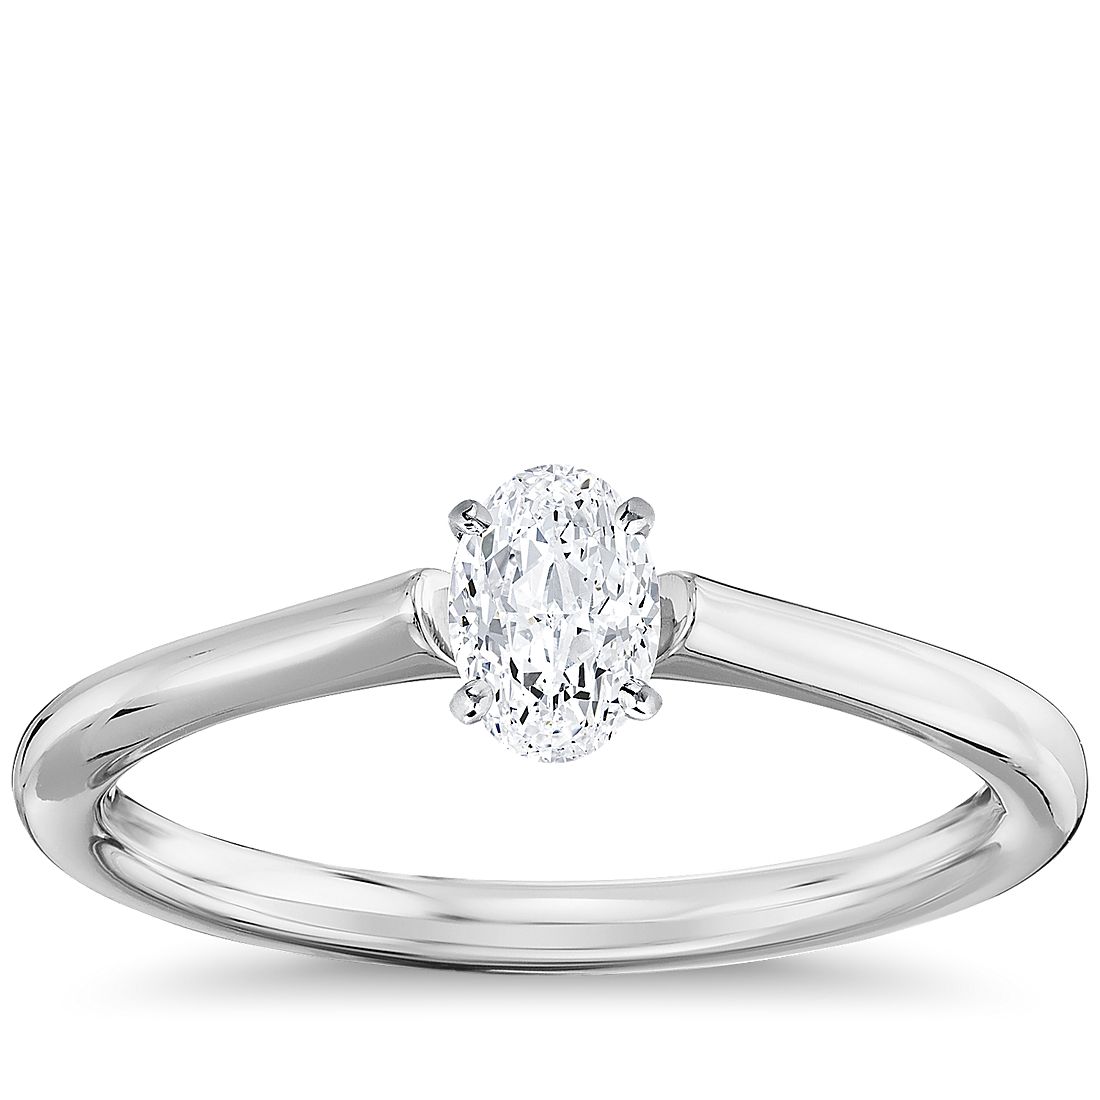 1/2 Carat ReadytoShip OvalCut Petite Solitaire Engagement Ring in